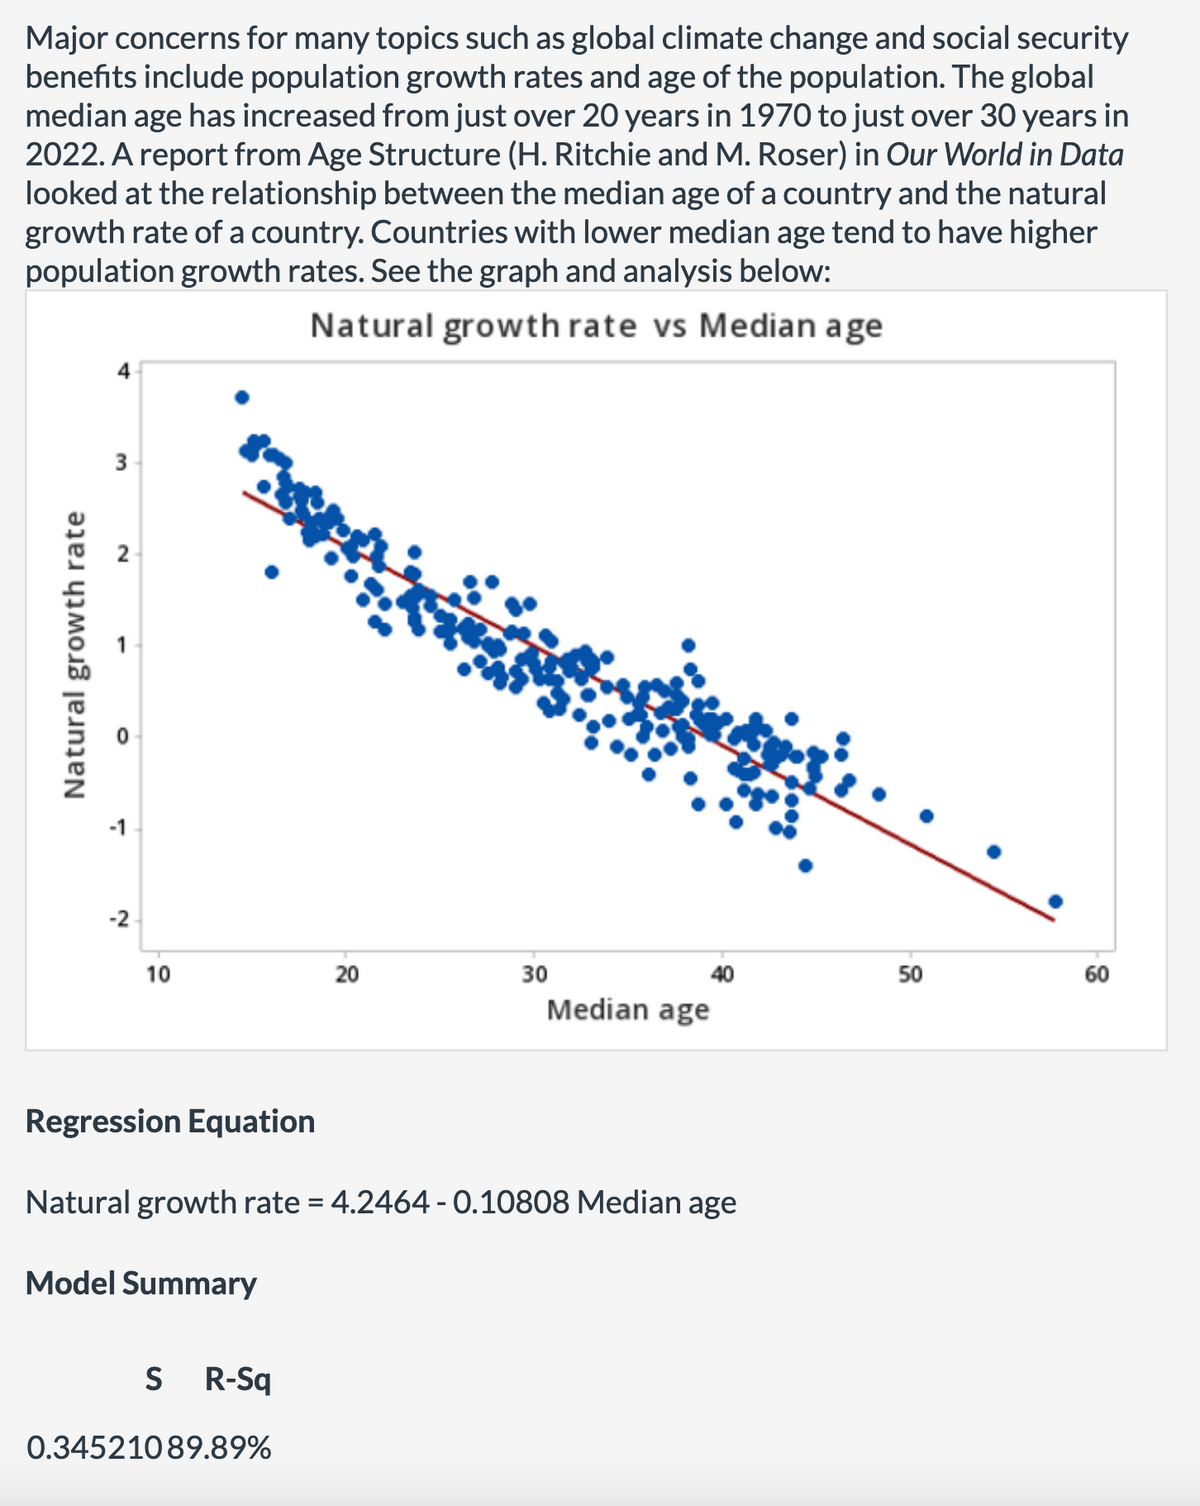 Major concerns for many topics such as global climate change and social security
benefits include population growth rates and age of the population. The global
median age has increased from just over 20 years in 1970 to just over 30 years in
2022. A report from Age Structure (H. Ritchie and M. Roser) in Our World in Data
looked at the relationship between the median age of a country and the natural
growth rate of a country. Countries with lower median age tend to have higher
population growth rates. See the graph and analysis below:
Natural growth rate vs Median age
Natural growth rate
3
N
-1
-2
10
Regression Equation
20
S R-Sq
0.34521089.89%
30
40
Median age
Natural growth rate = 4.2464 -0.10808 Median age
Model Summary
50
60